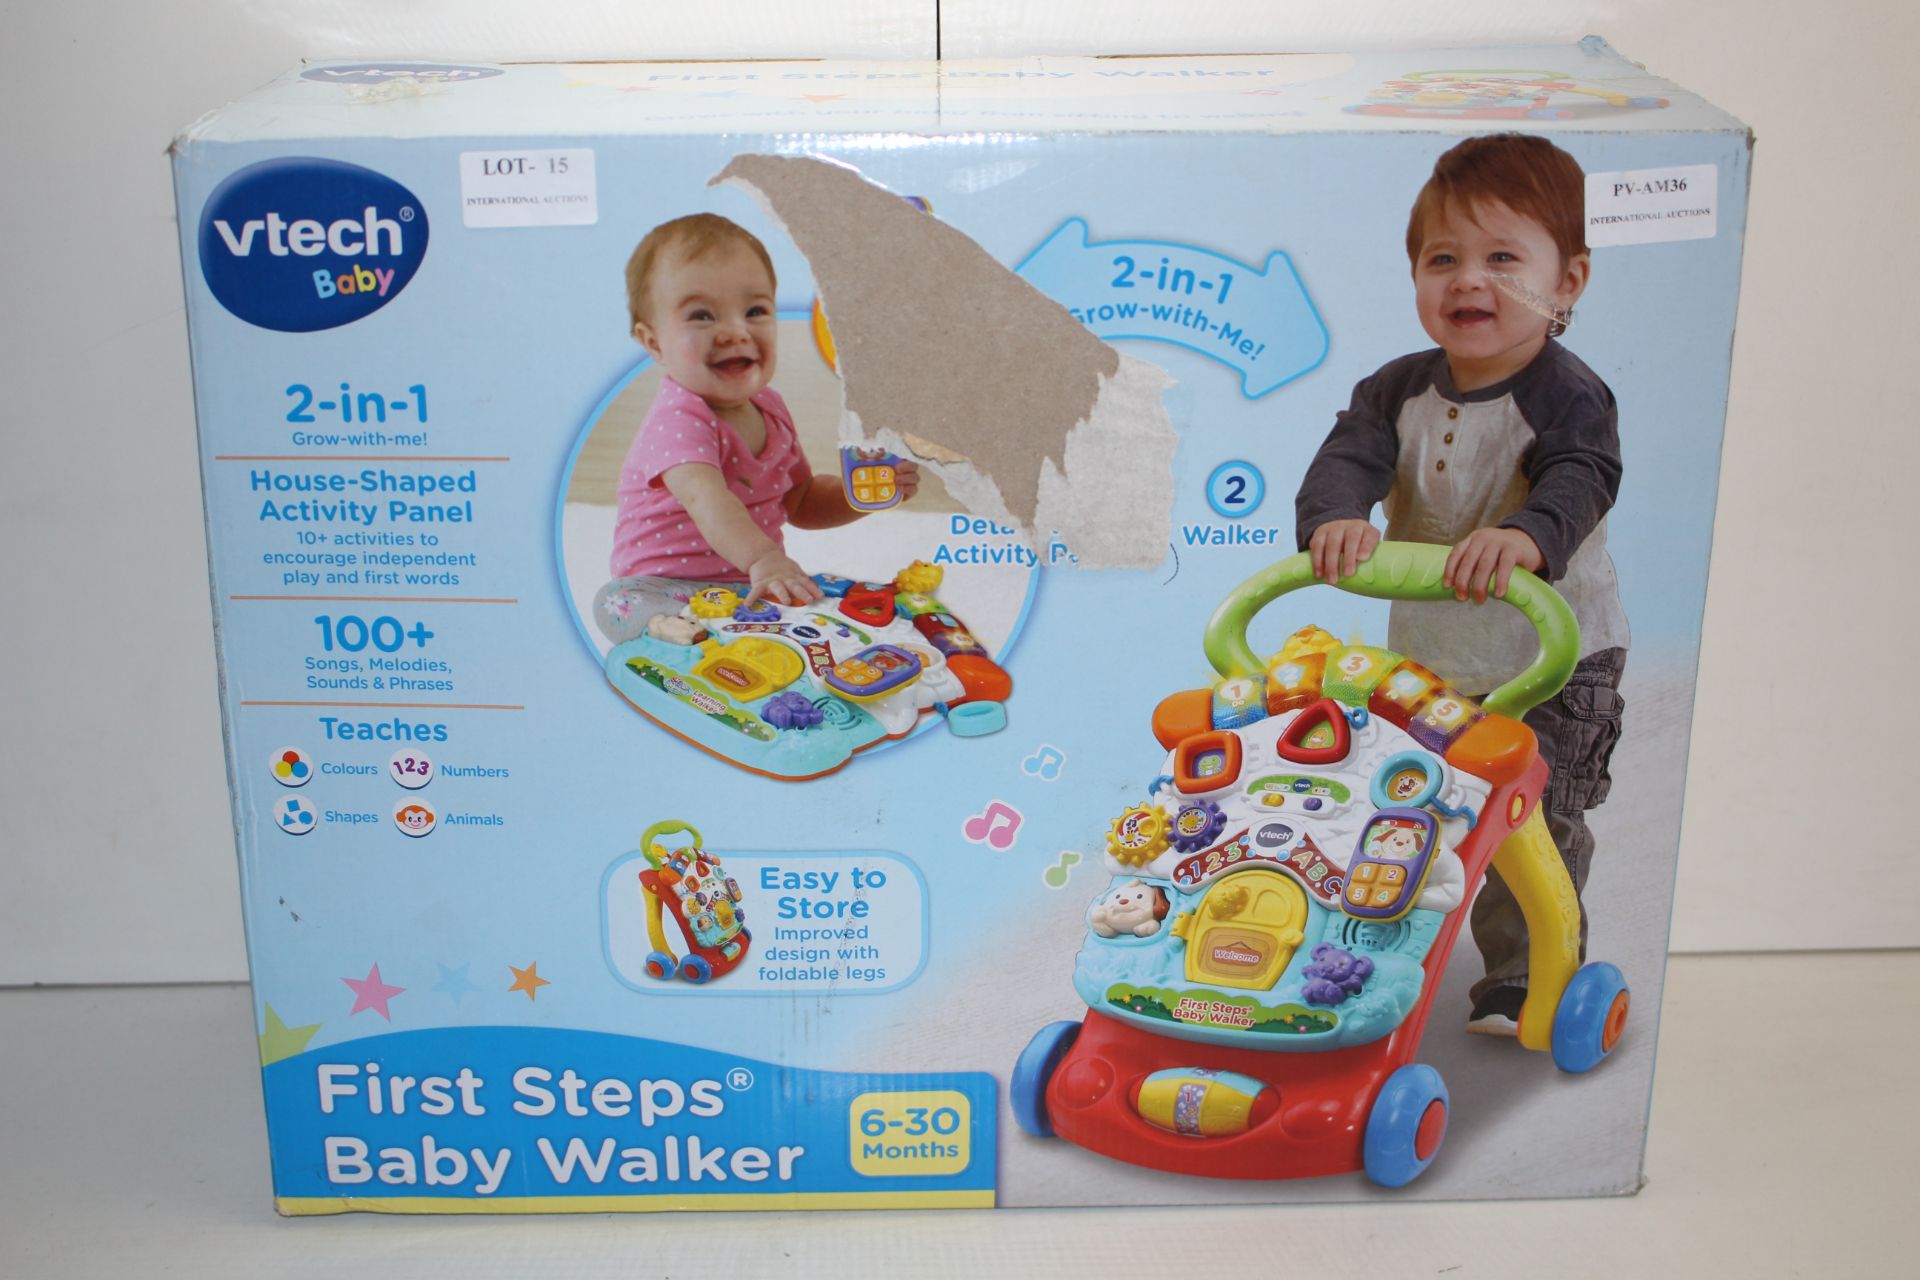 BOXED VTECH BABY FIRST STEPS BABY WALKER 6-30MTHS